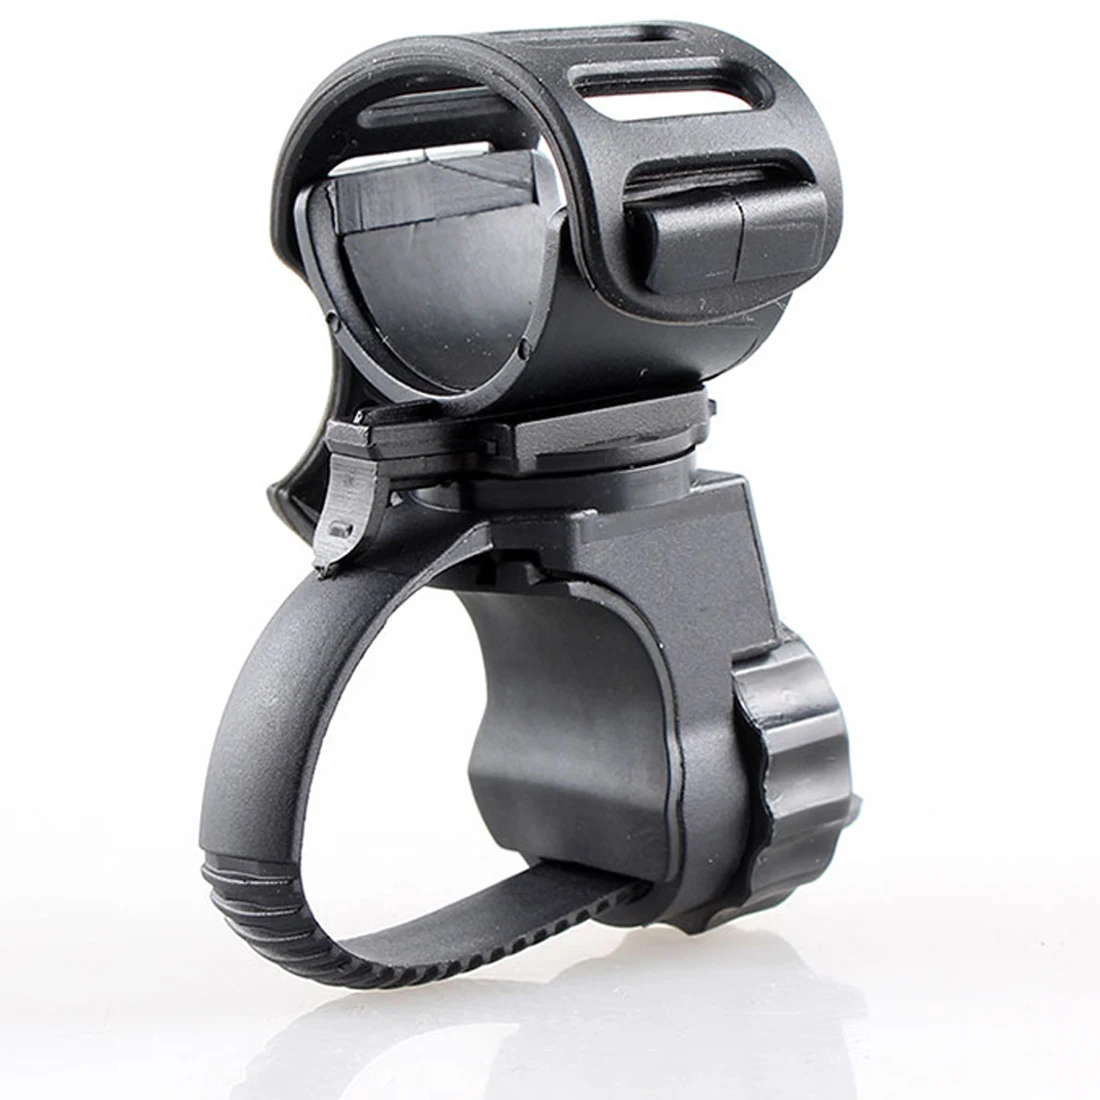 Bicycle LED Light Flashlight Torch Clip Mount Clamp Stand Holder Grip Bracket 